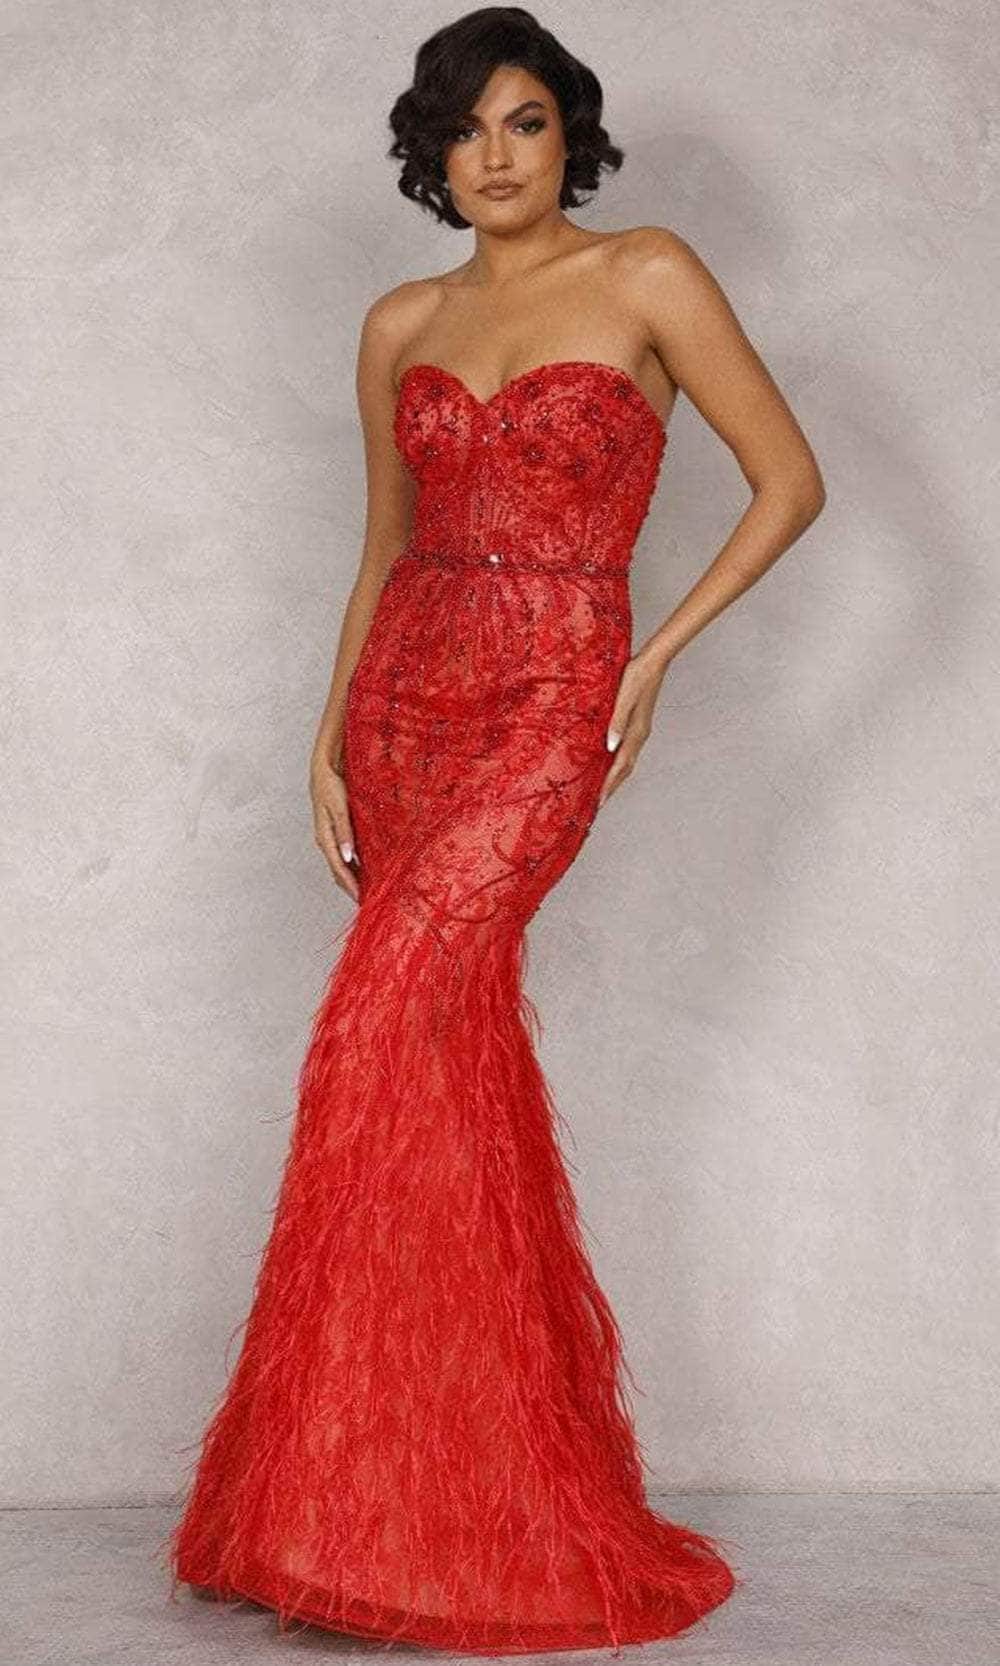 Image of Terani Couture 2221GL0414 - Strapless Feather Trumpet Evening Dress